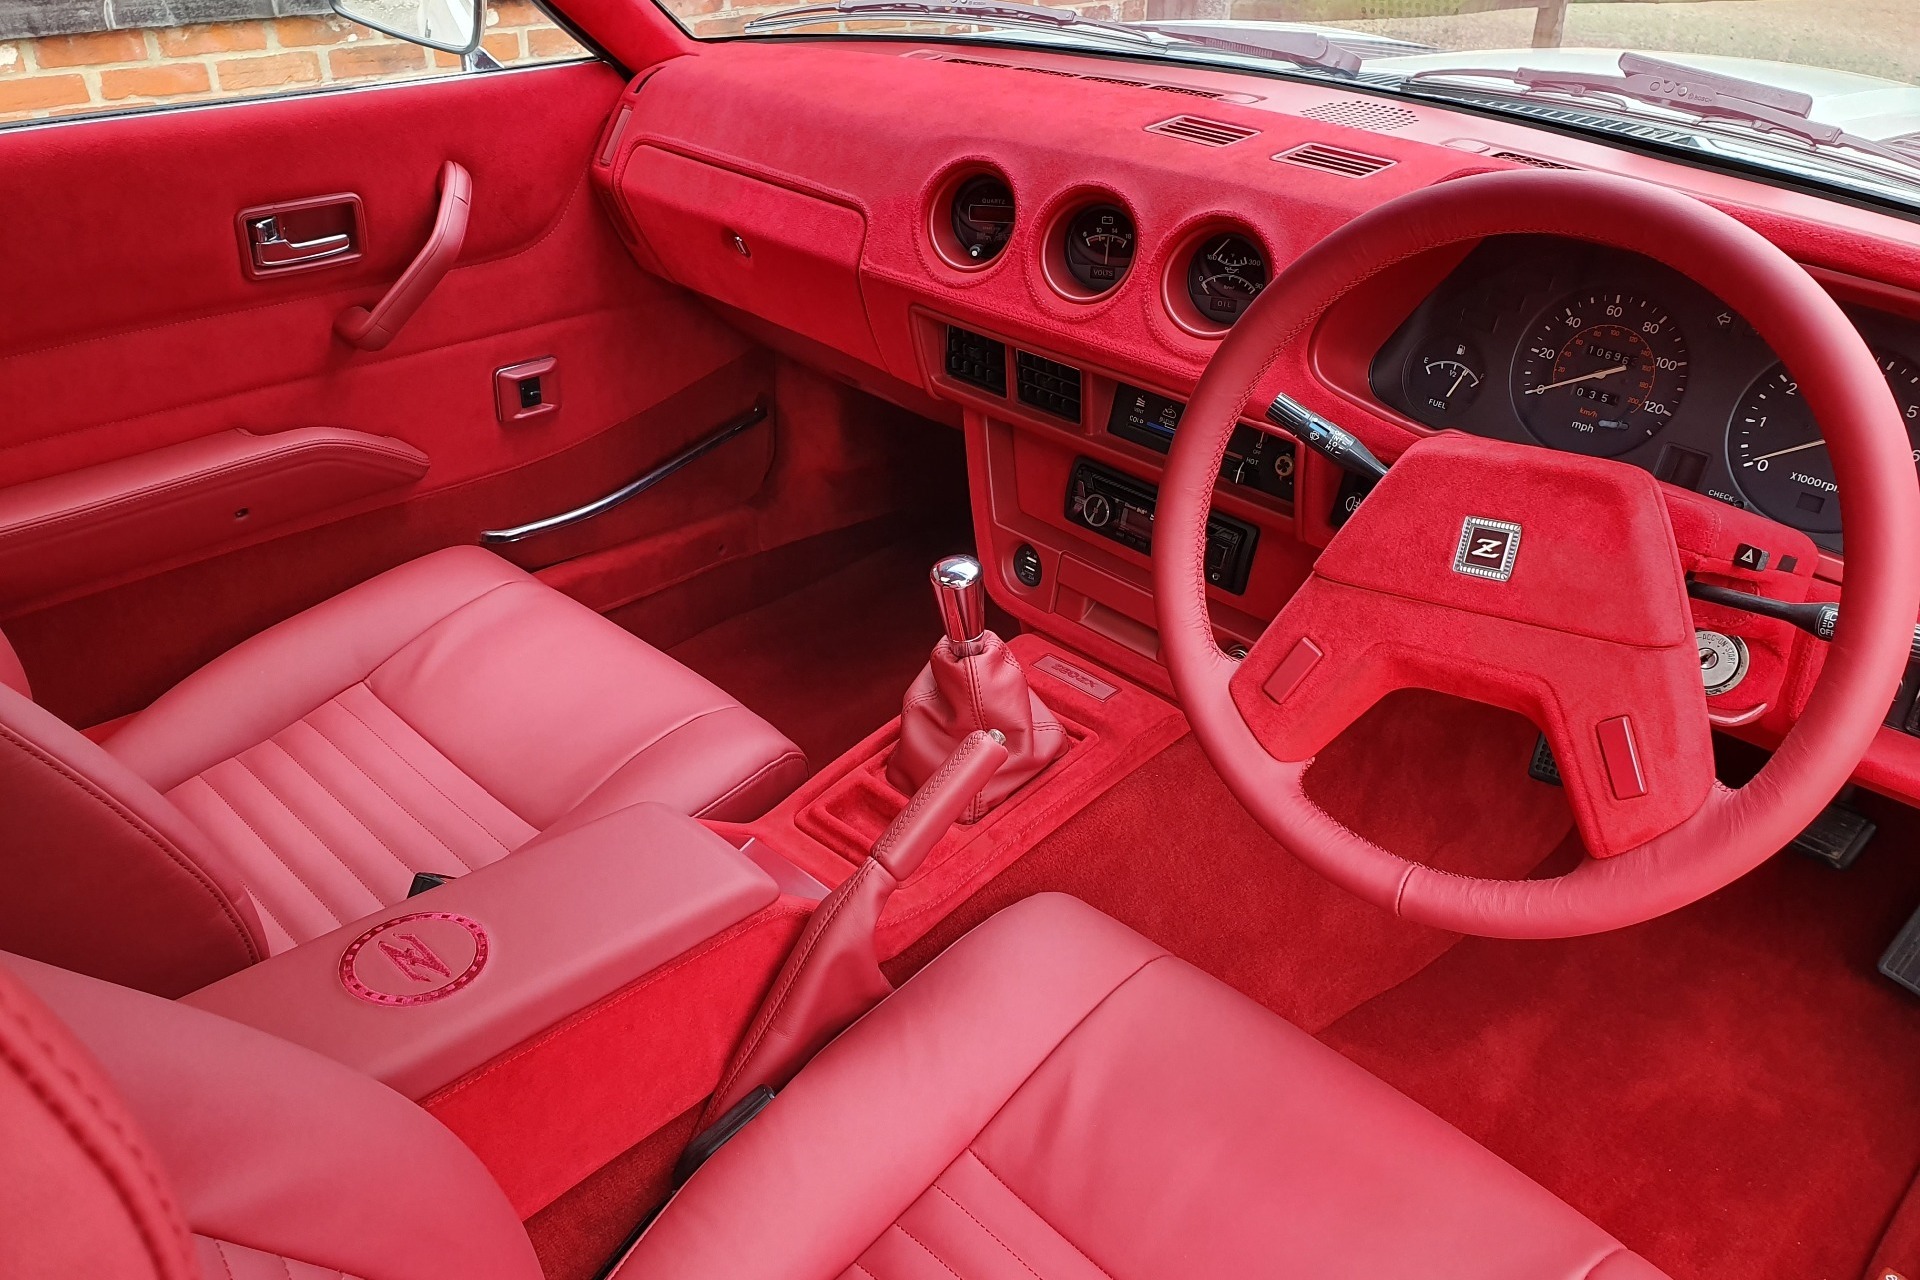 Datsun 280 ZX interior by SF Cartrim